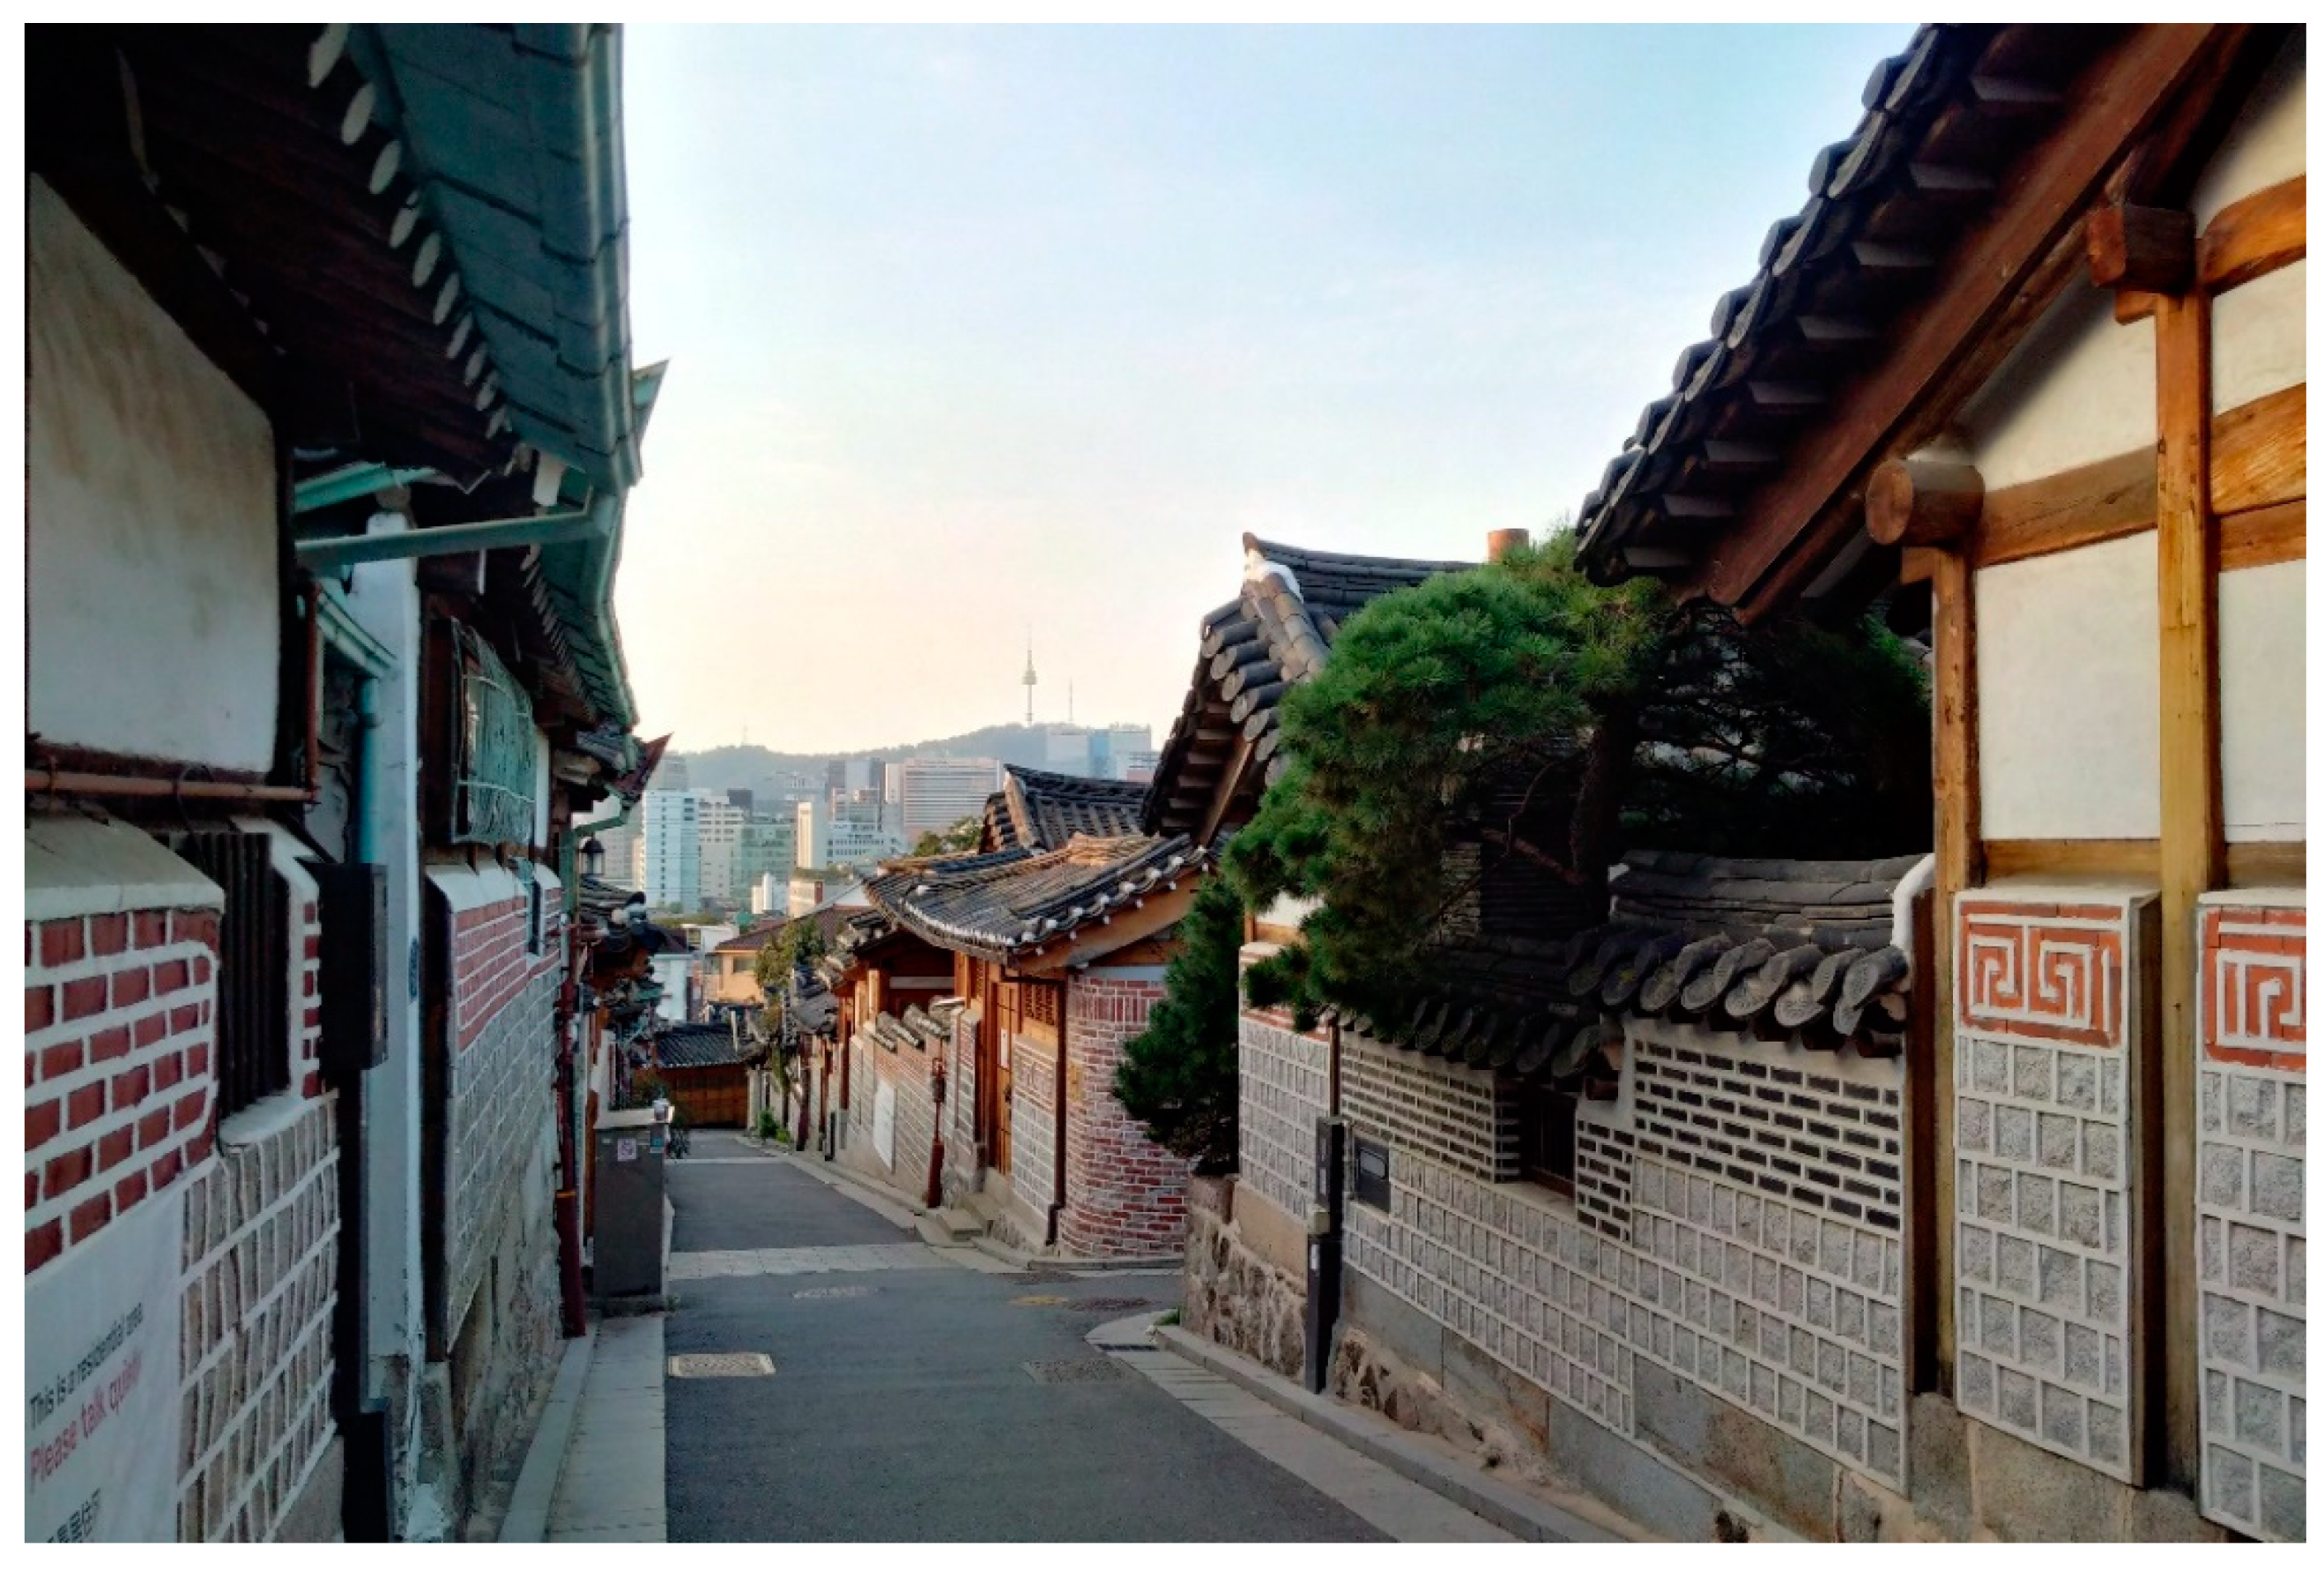 Seoul (South Korea): reconstruction of a Seventies-style